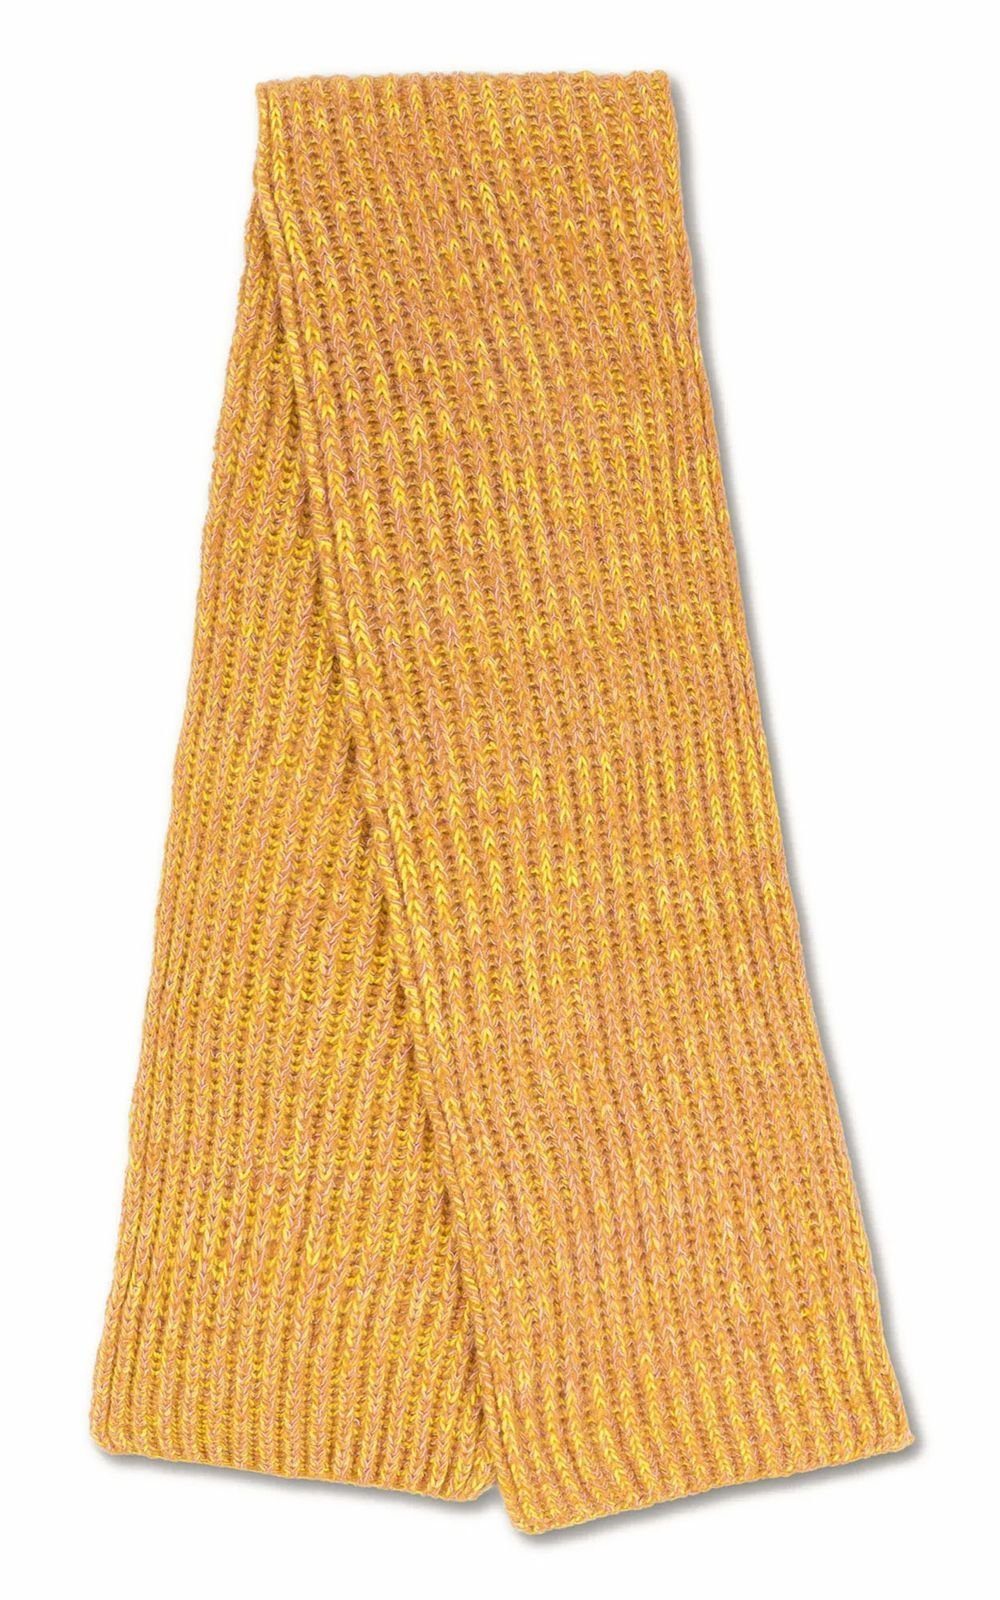 Tweed Modeschal Yellow Safety Oilily